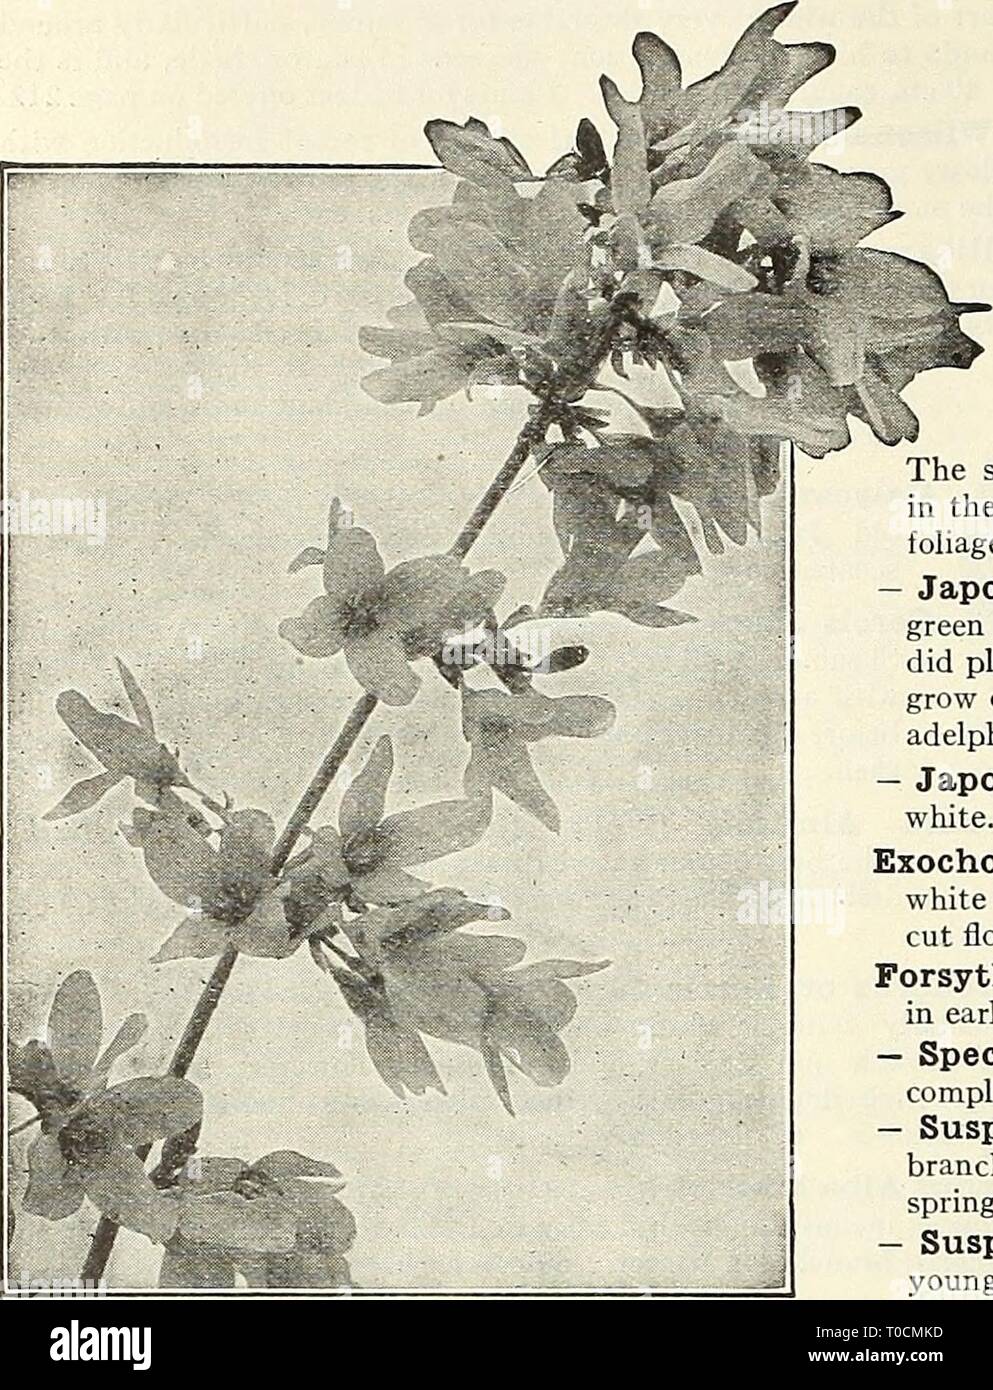 Dreer's garden book 1930 (1930) Dreer's garden book 1930 dreersgardenbook1930henr Year: 1930  202 /flEIMM M CHOICE HARDY SHRUBS &gt;HMEIiPlM !    FORSYTHIA Crataegus Oxyacantha Paul's Double (English Hawthorn). This is the finest variety with brilliant scarlet double flowers. Plants 3 to 4 feet high, $2.00 each. Desmodium Penduliflorum. A Shrub which dies to the ground in winter but comes up vigorously in spring, throwing up shoots 3 to 4 feet high, which bear during September attractive sprays of bright rose colored pea-shaped flowers. 60 cts. each. Deutzias. Well-known profuse flowering Shru Stock Photo